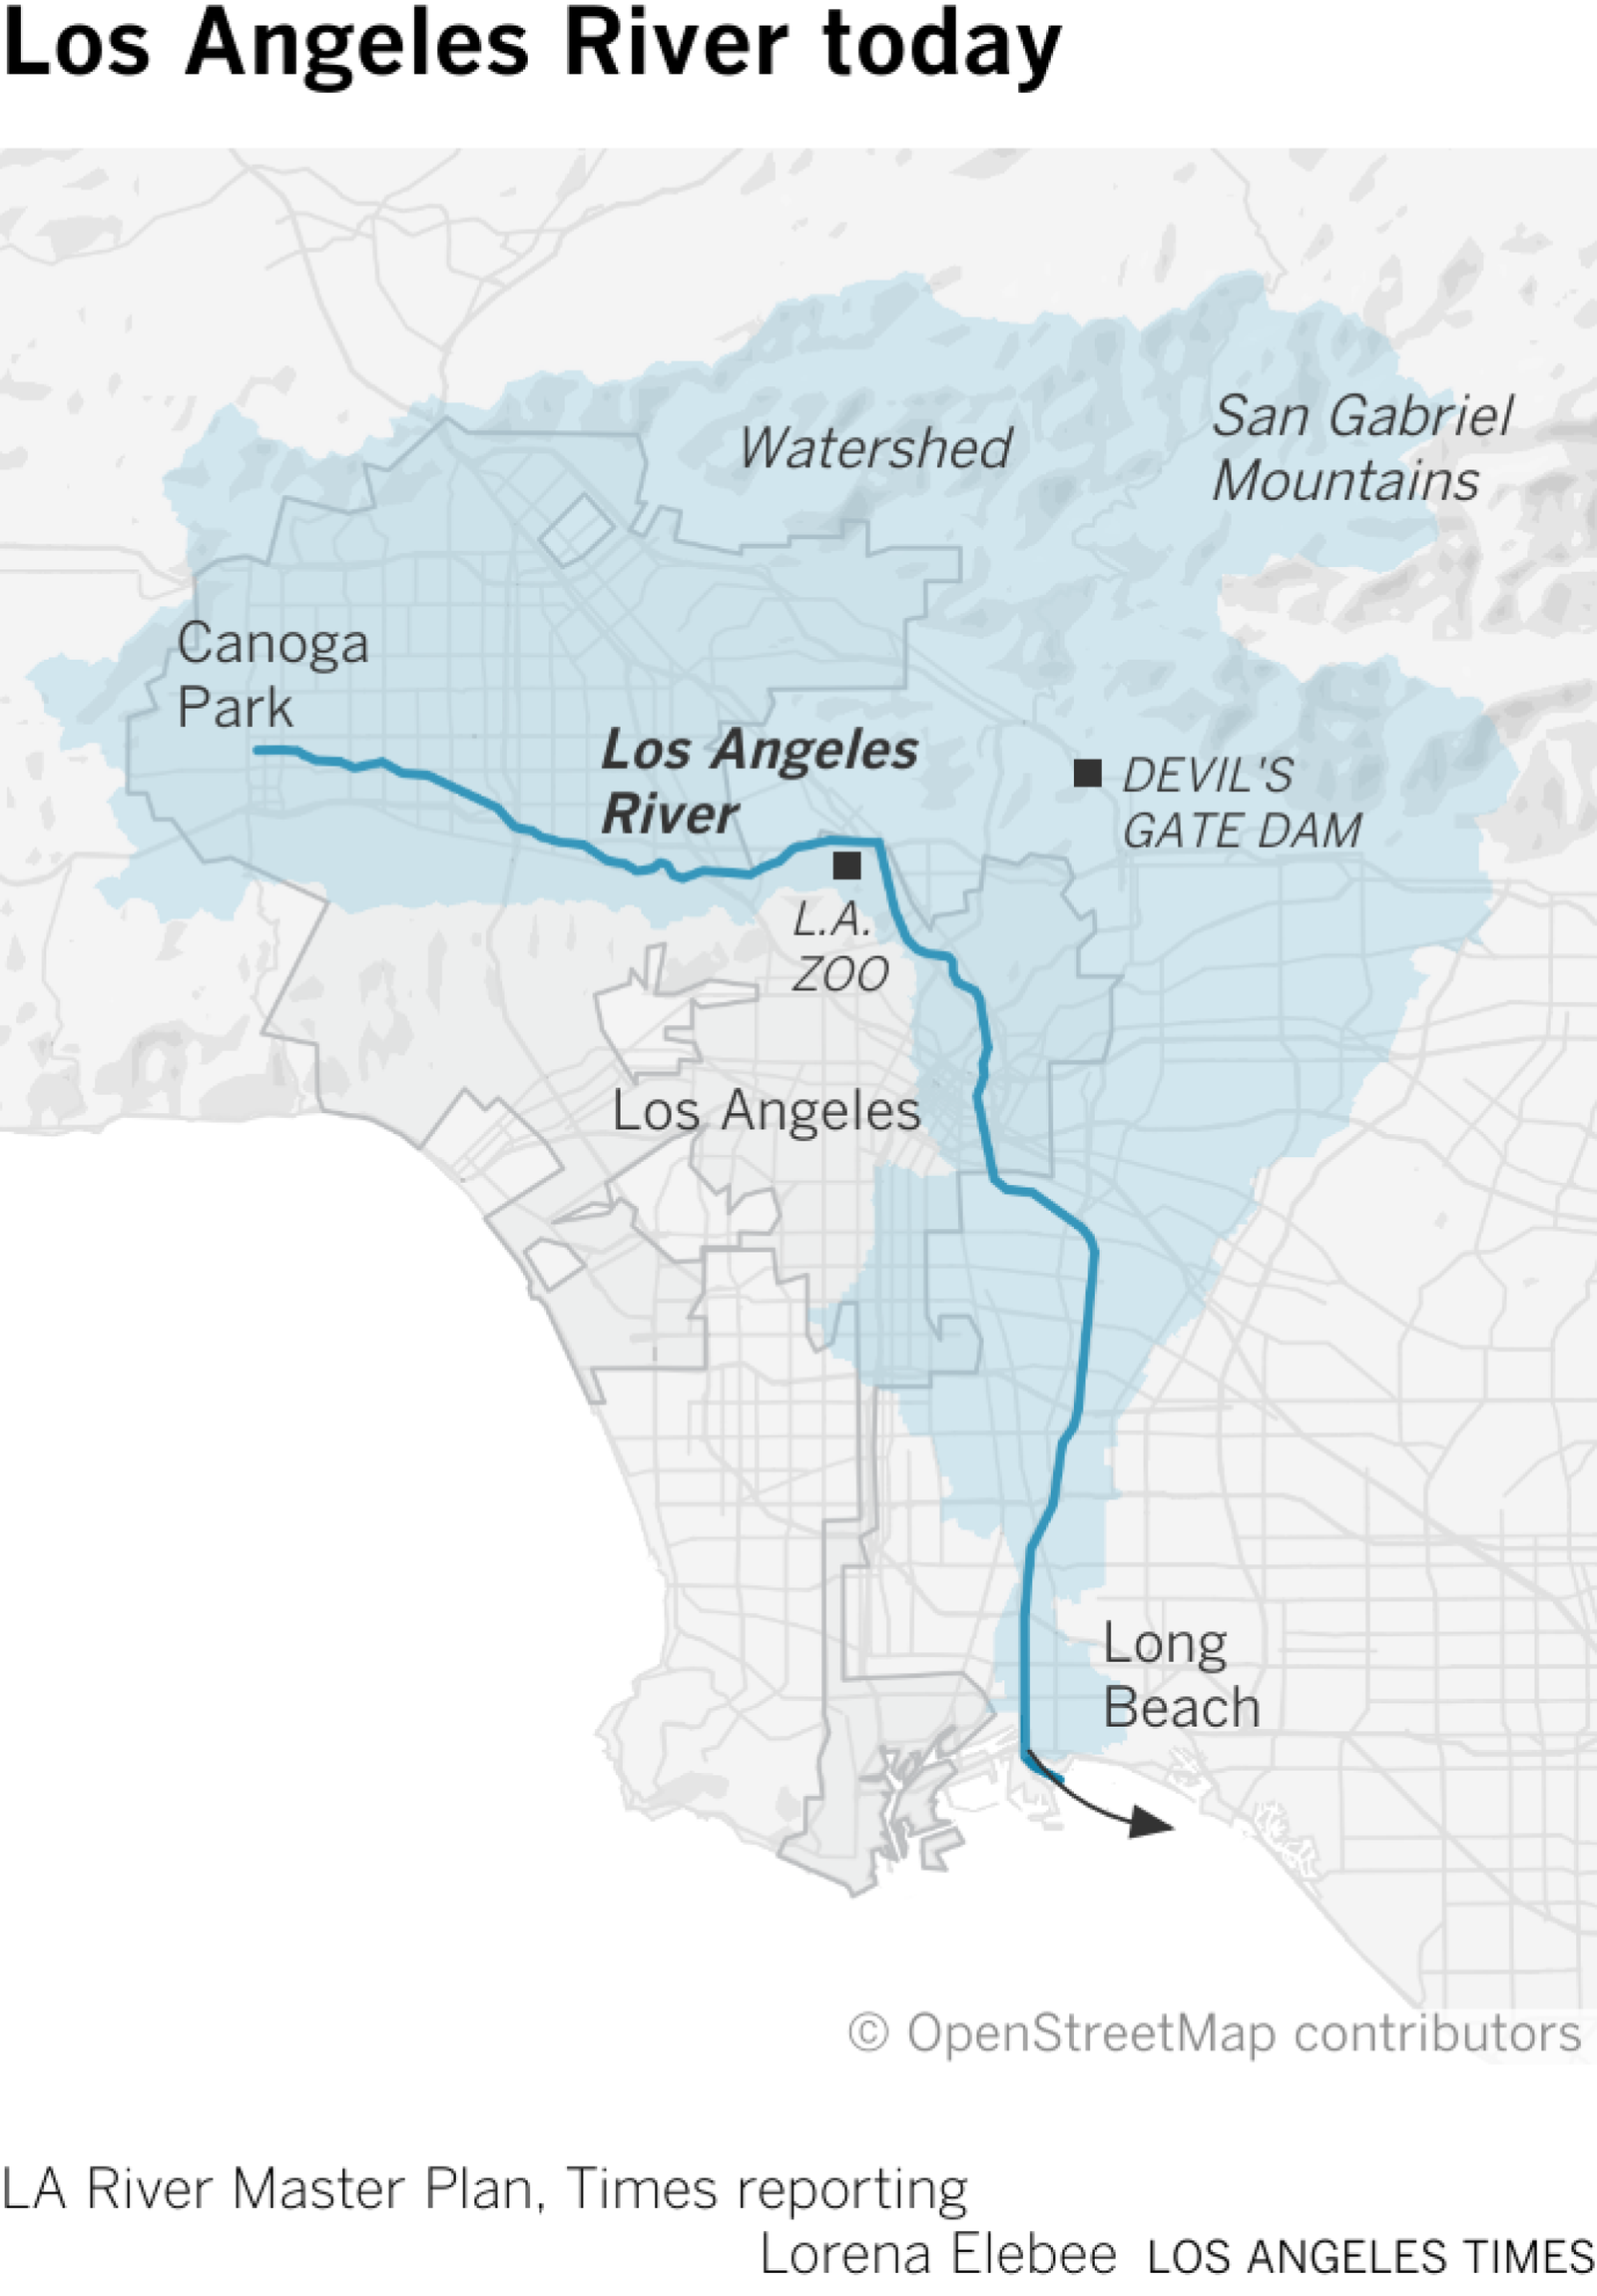 Map show the Los Angeles River today with concrete channel stretching from Los Angeles Zoo through Long Beach.